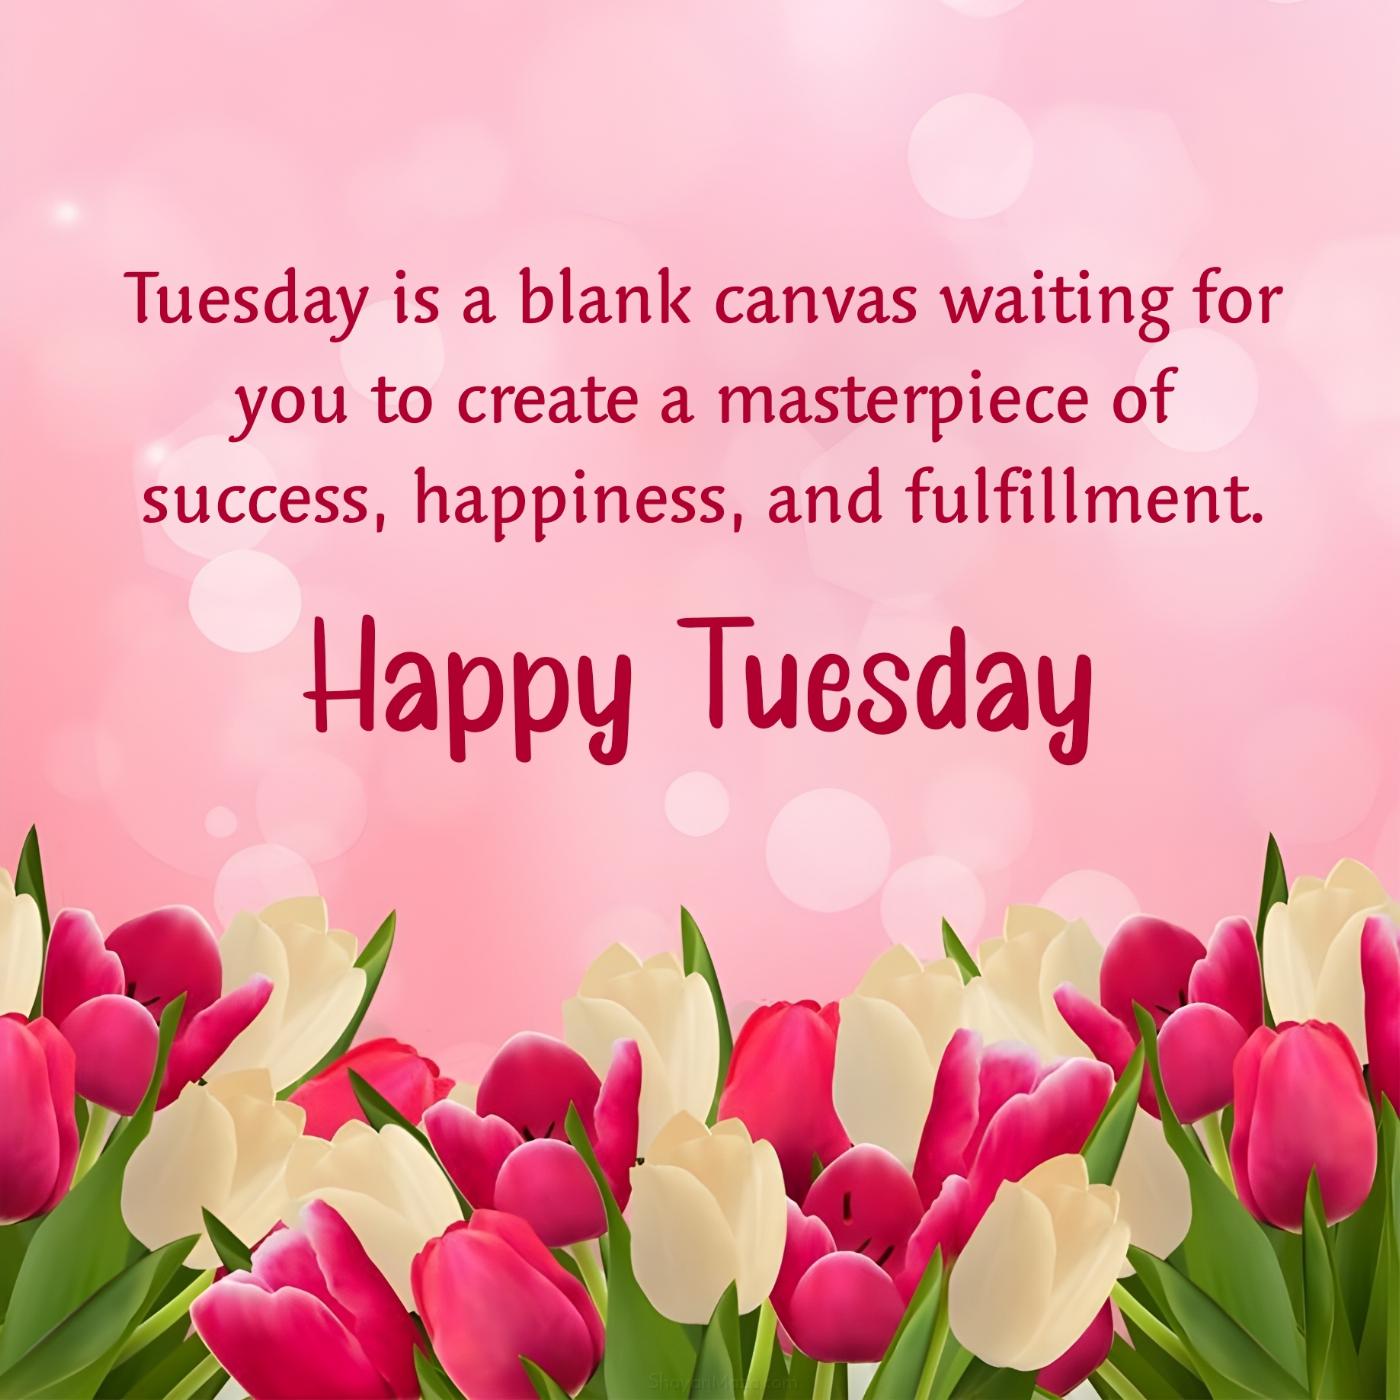 Tuesday is a blank canvas waiting for you to create a masterpiece